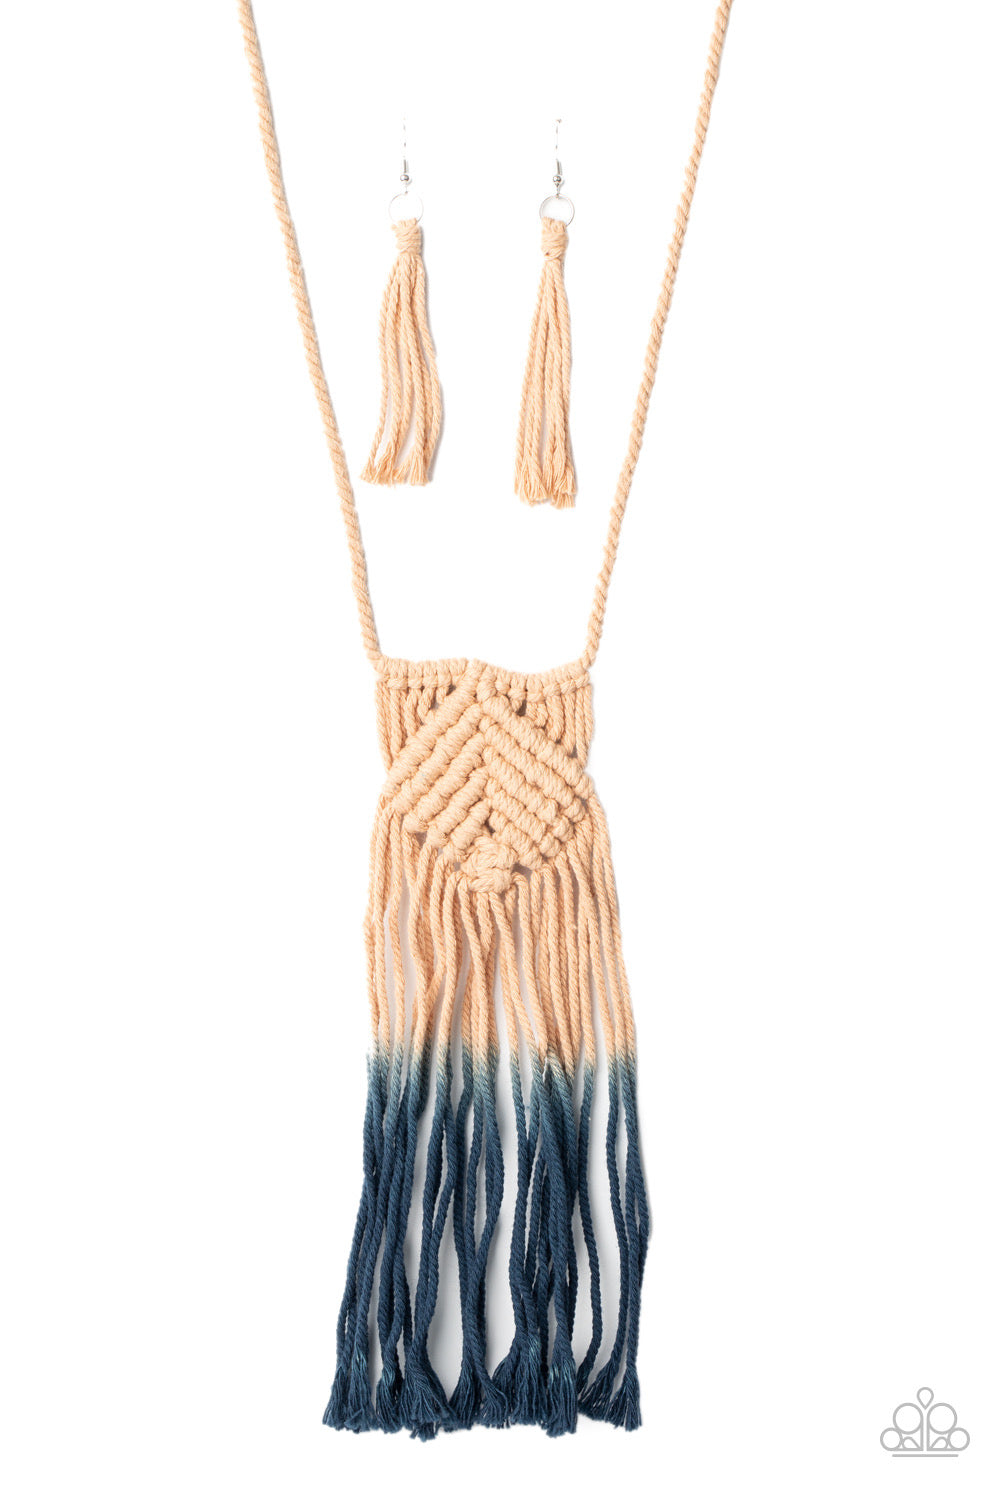 Look At MACRAME Now - Blue